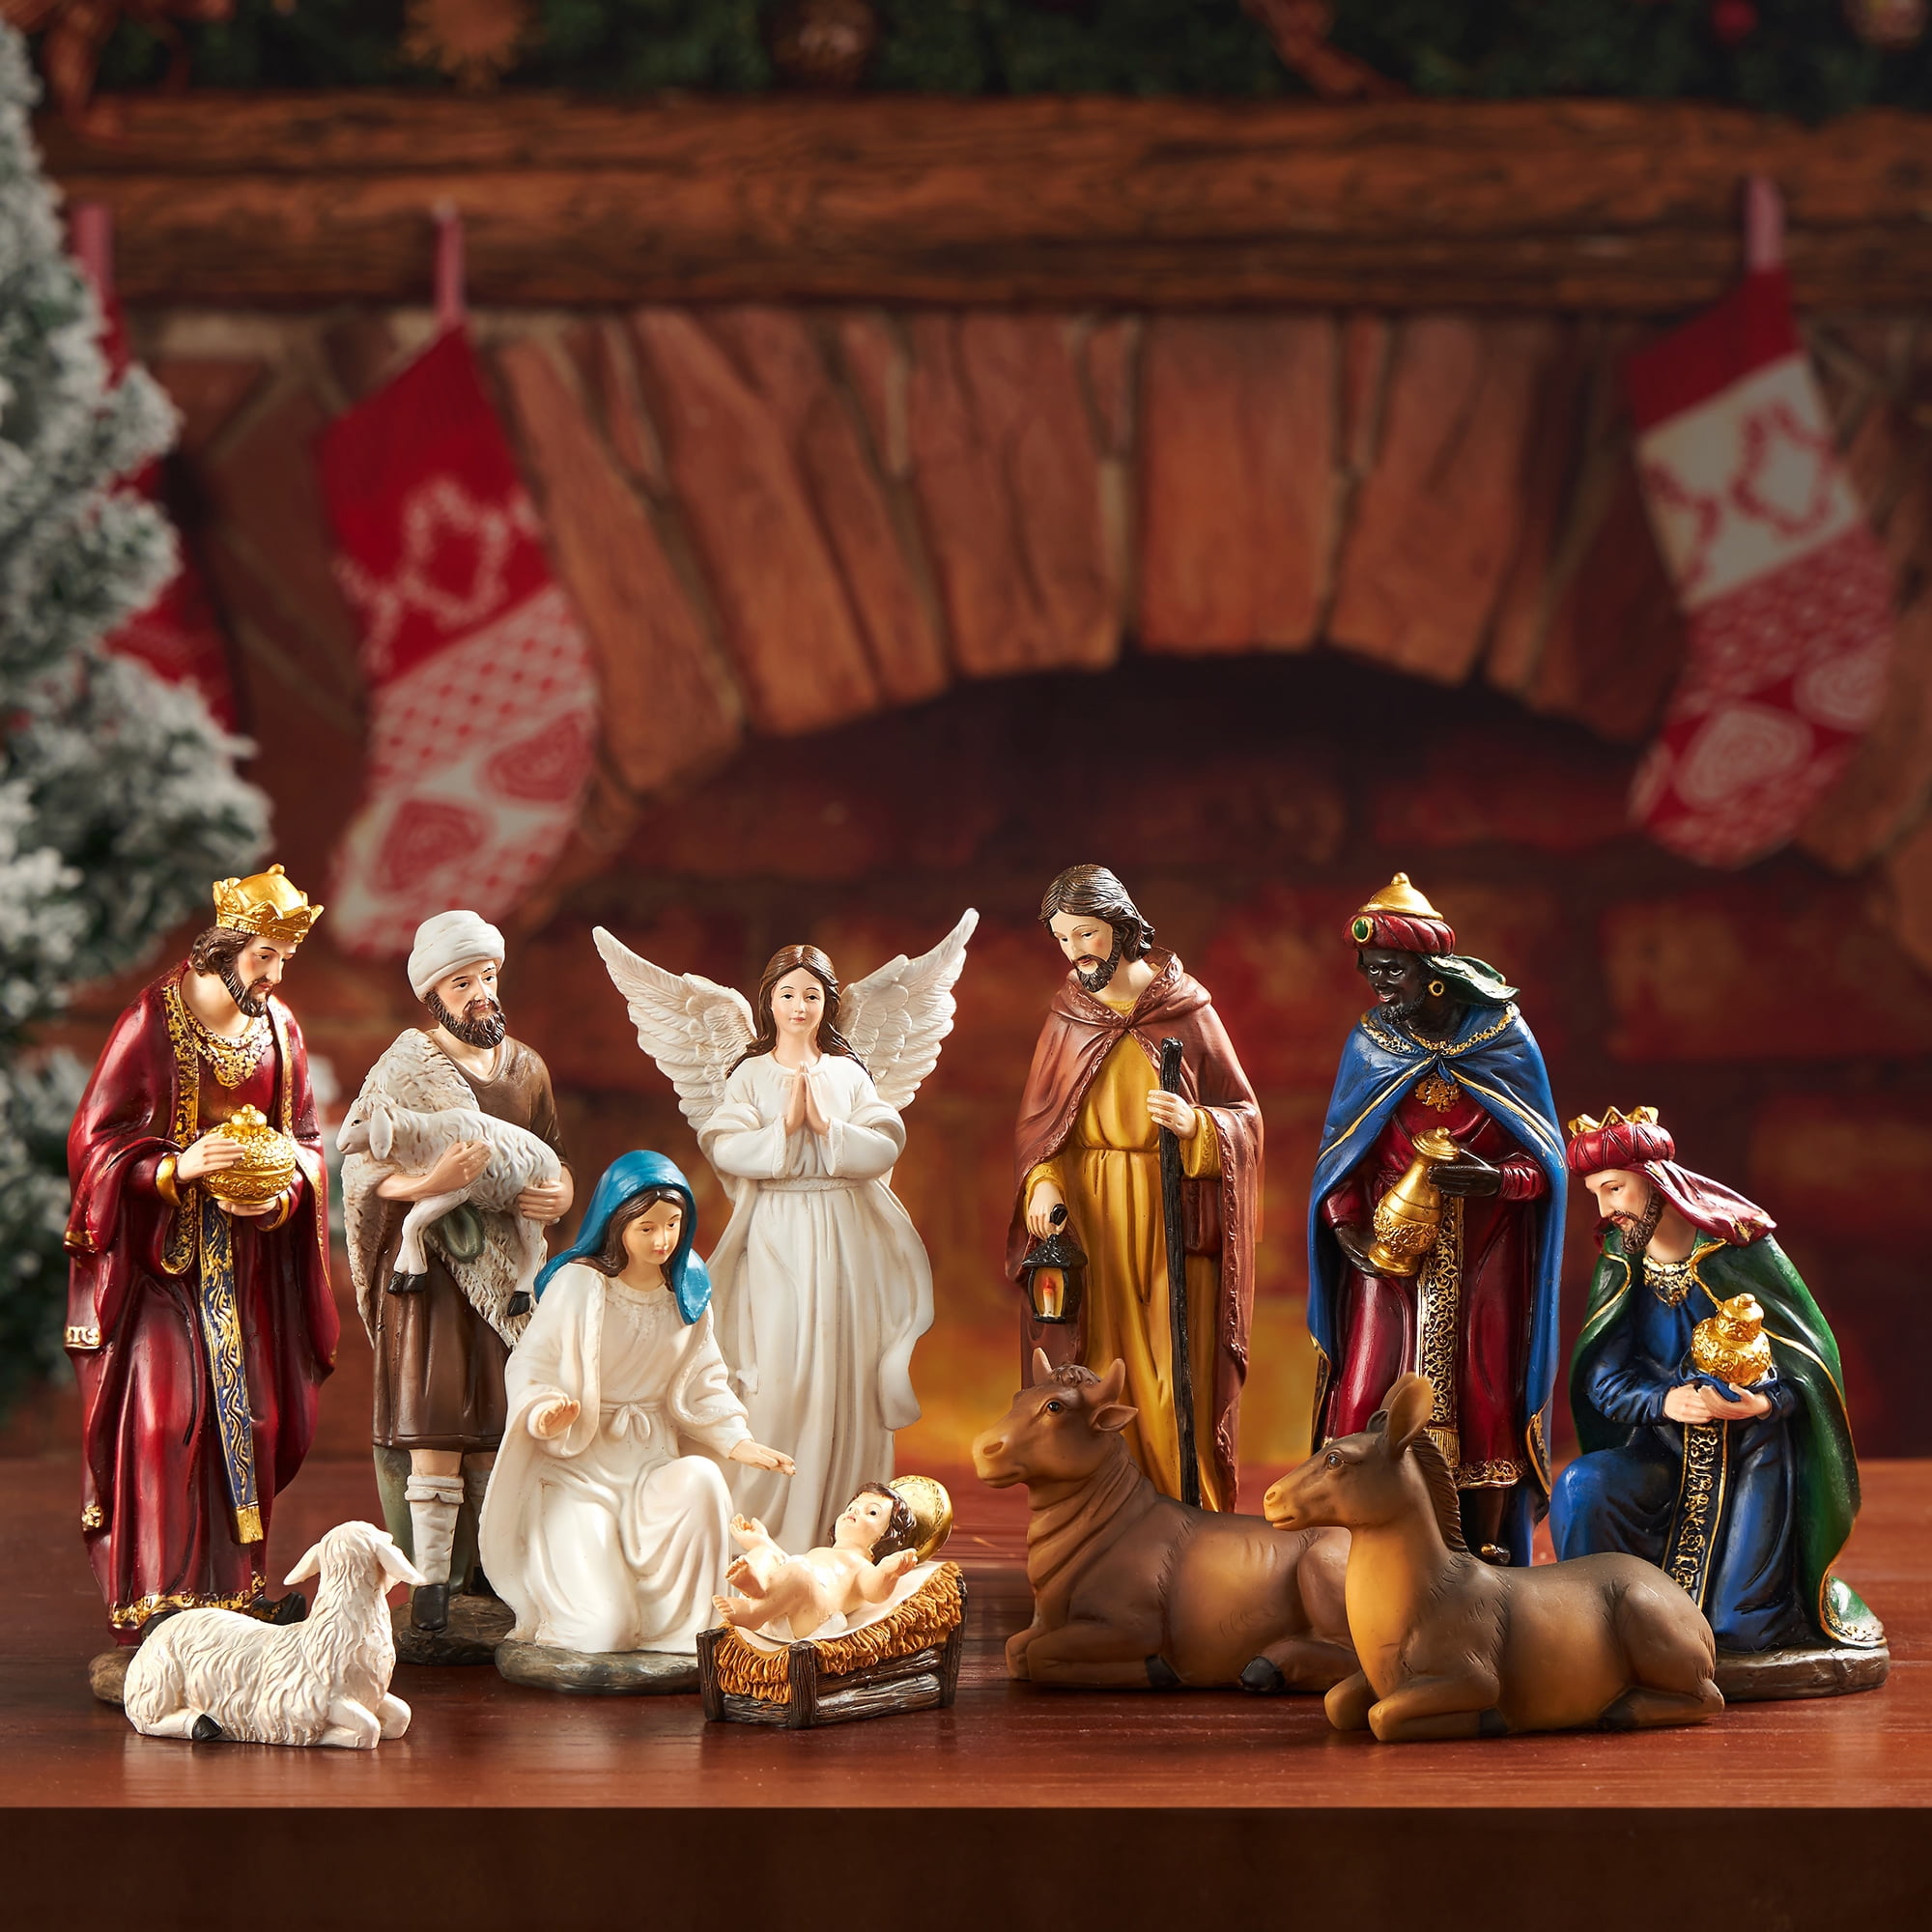 Holiday　Pieces　Religious　13　Family　Nativity　Indoor　Christmas　Decorations　Gift　Nativity　Scene　Set　TOETOL　inch